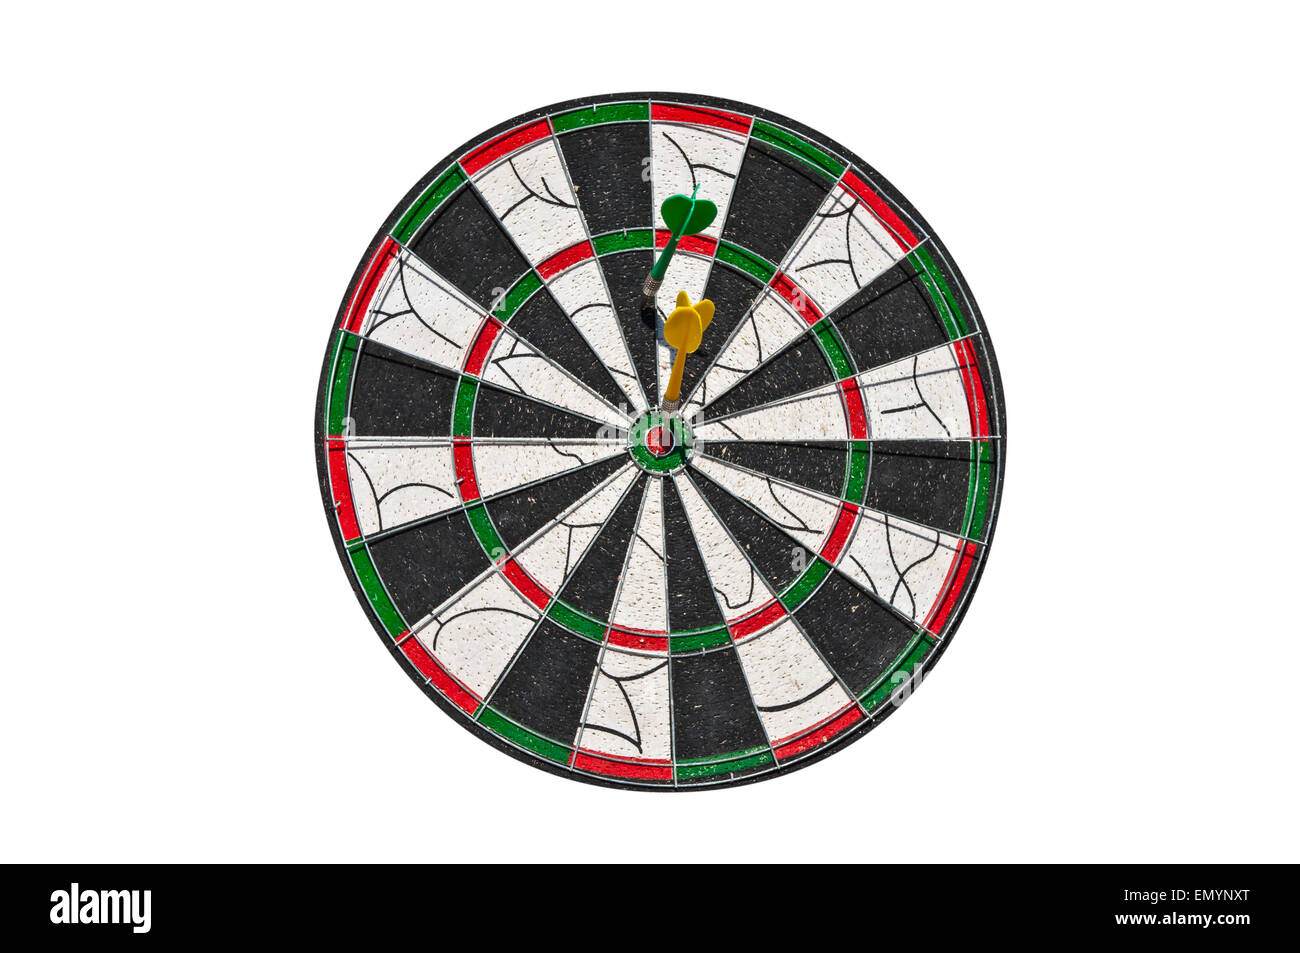 Two darts on a dartboard. One in the center, second the other off center. Isolated on white background. Stock Photo